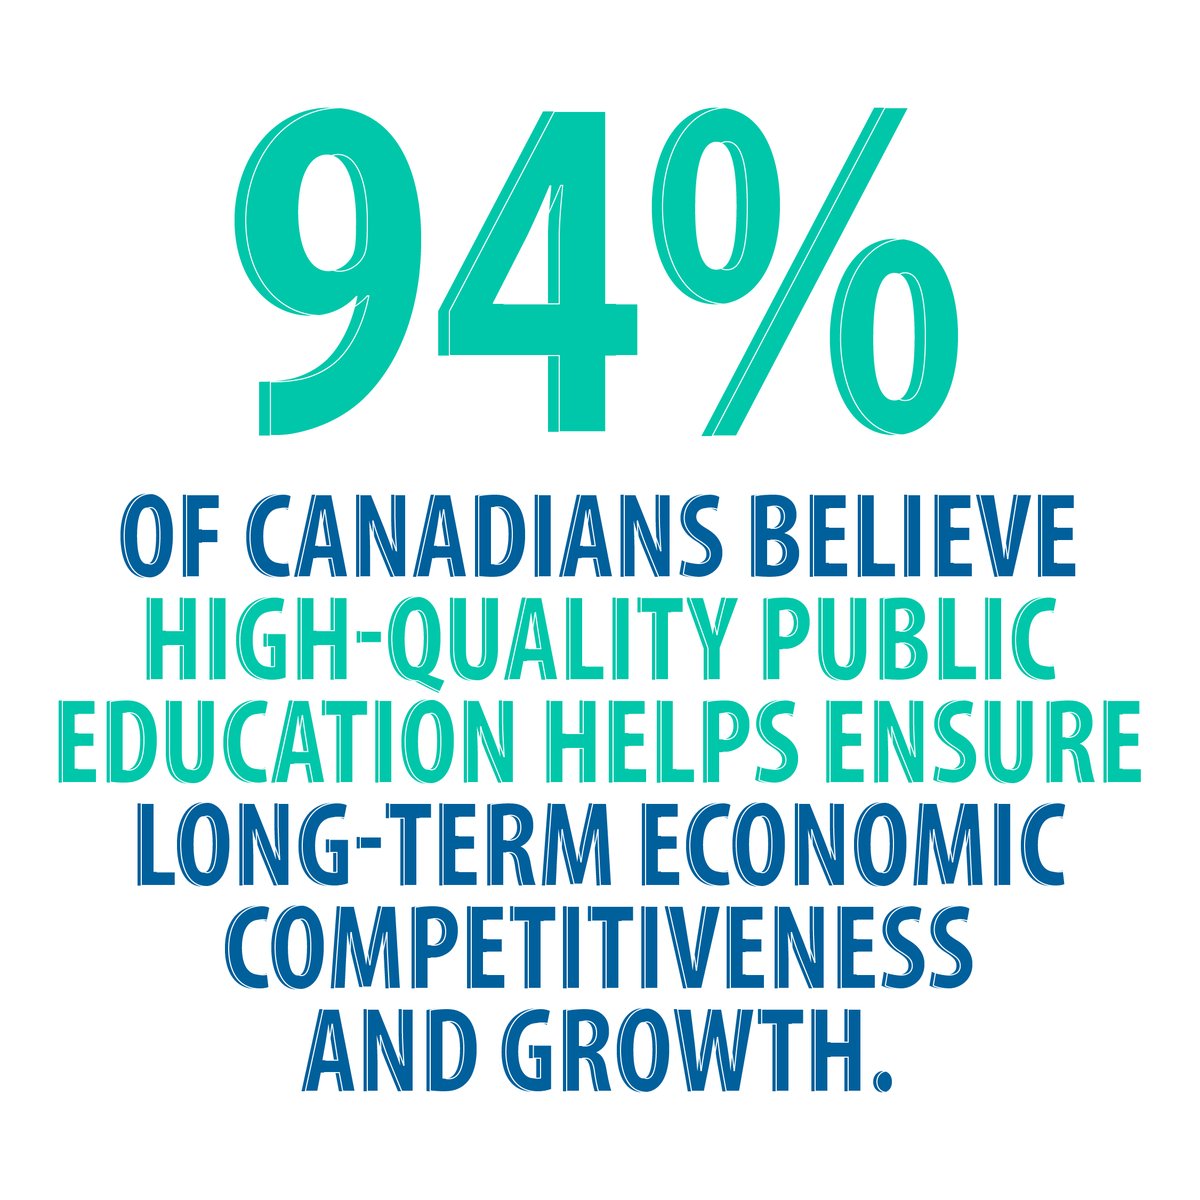 It’s time to start a #nationalconversation to better support and strengthen publicly funded public education in Canada.